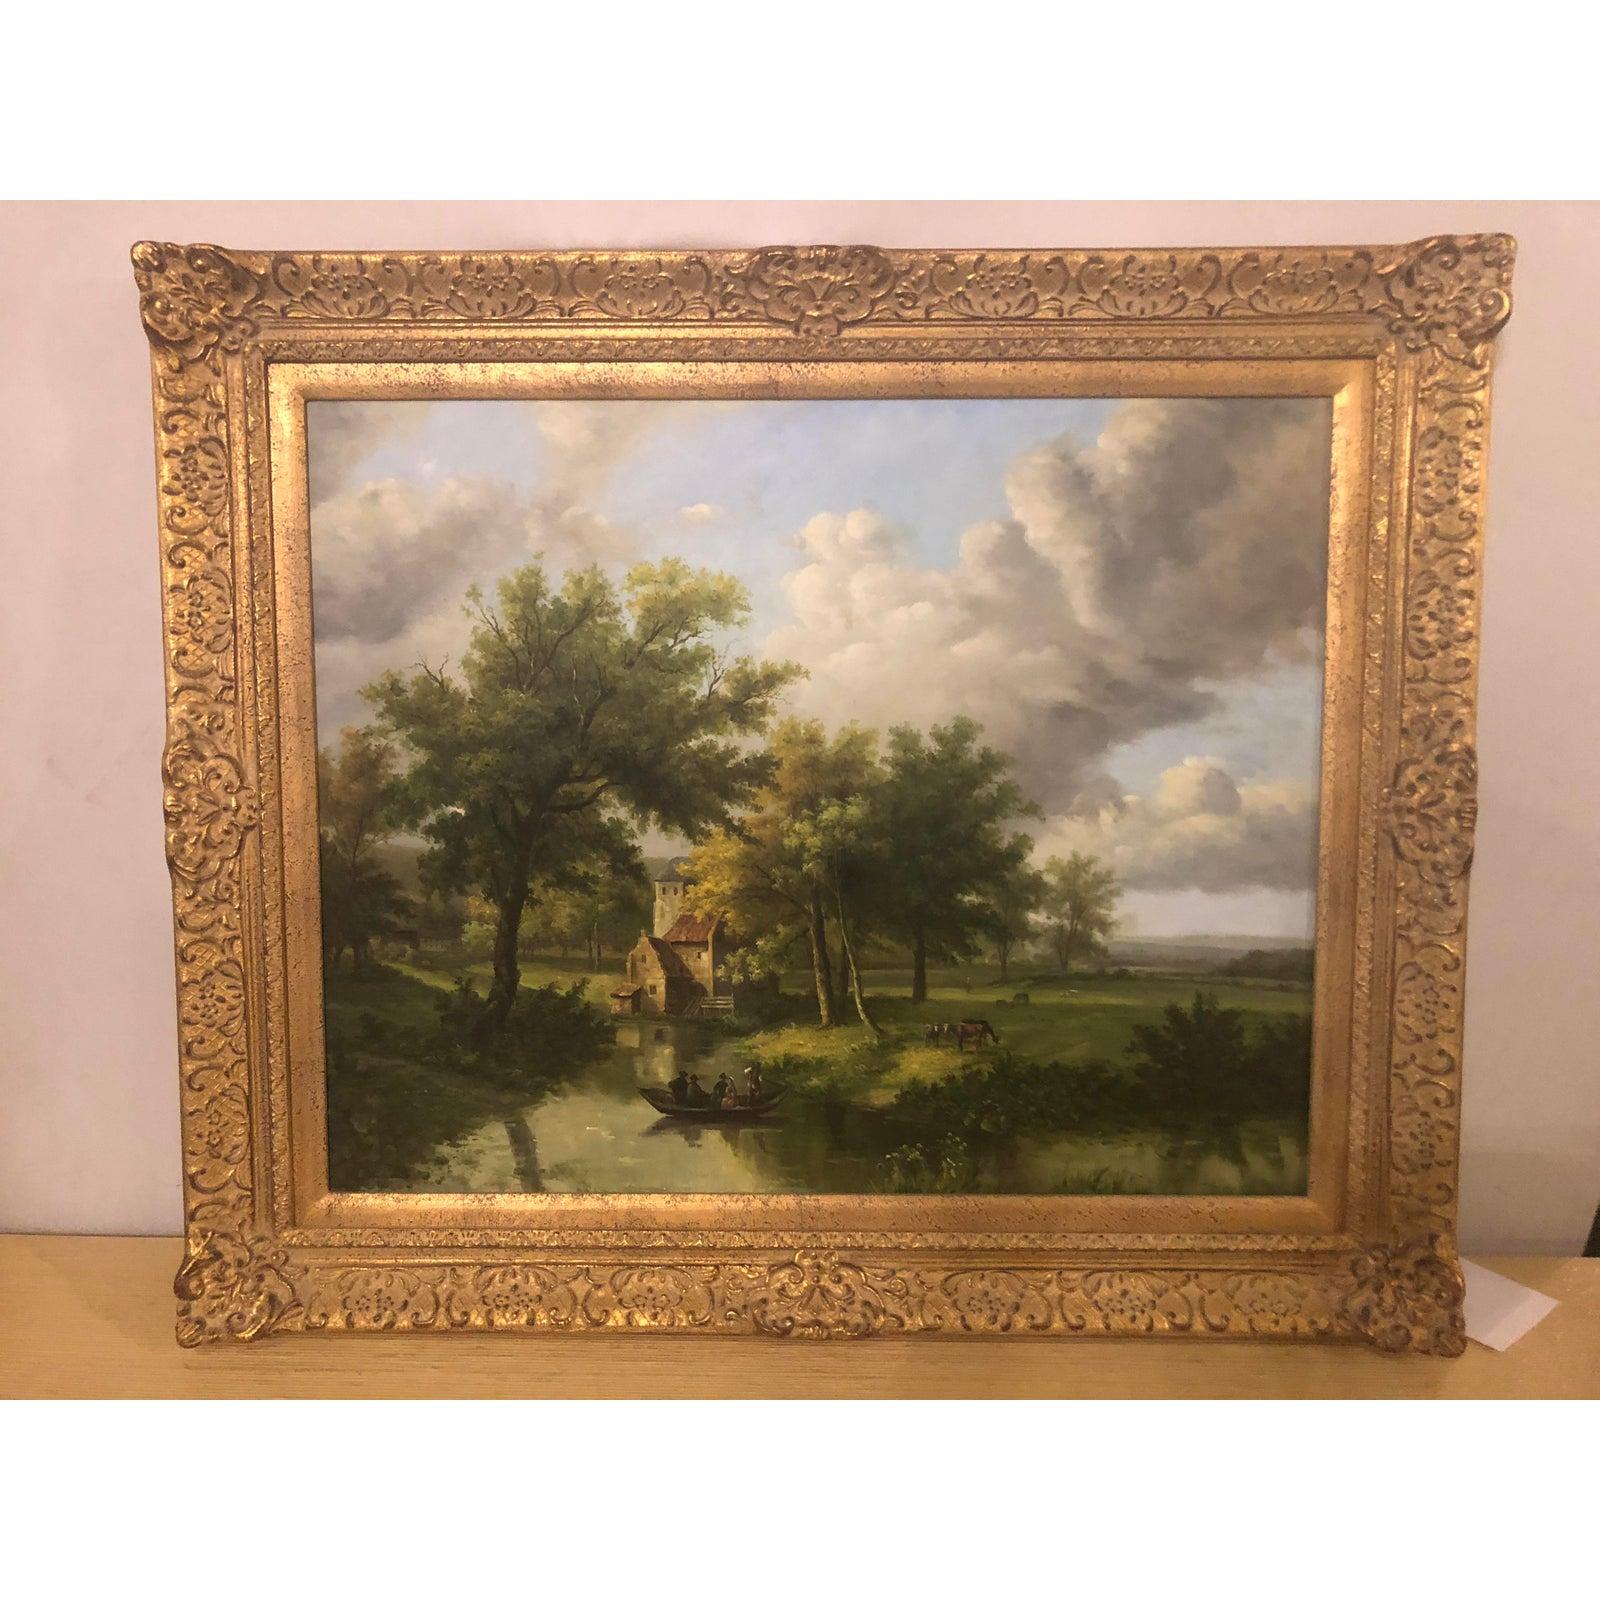 A beautiful oil on canvas landscaping painting. The painting features so many details of country daily life and is presented in a hand carved gilt custom gilt frame. 

Measures: Framed - H 31